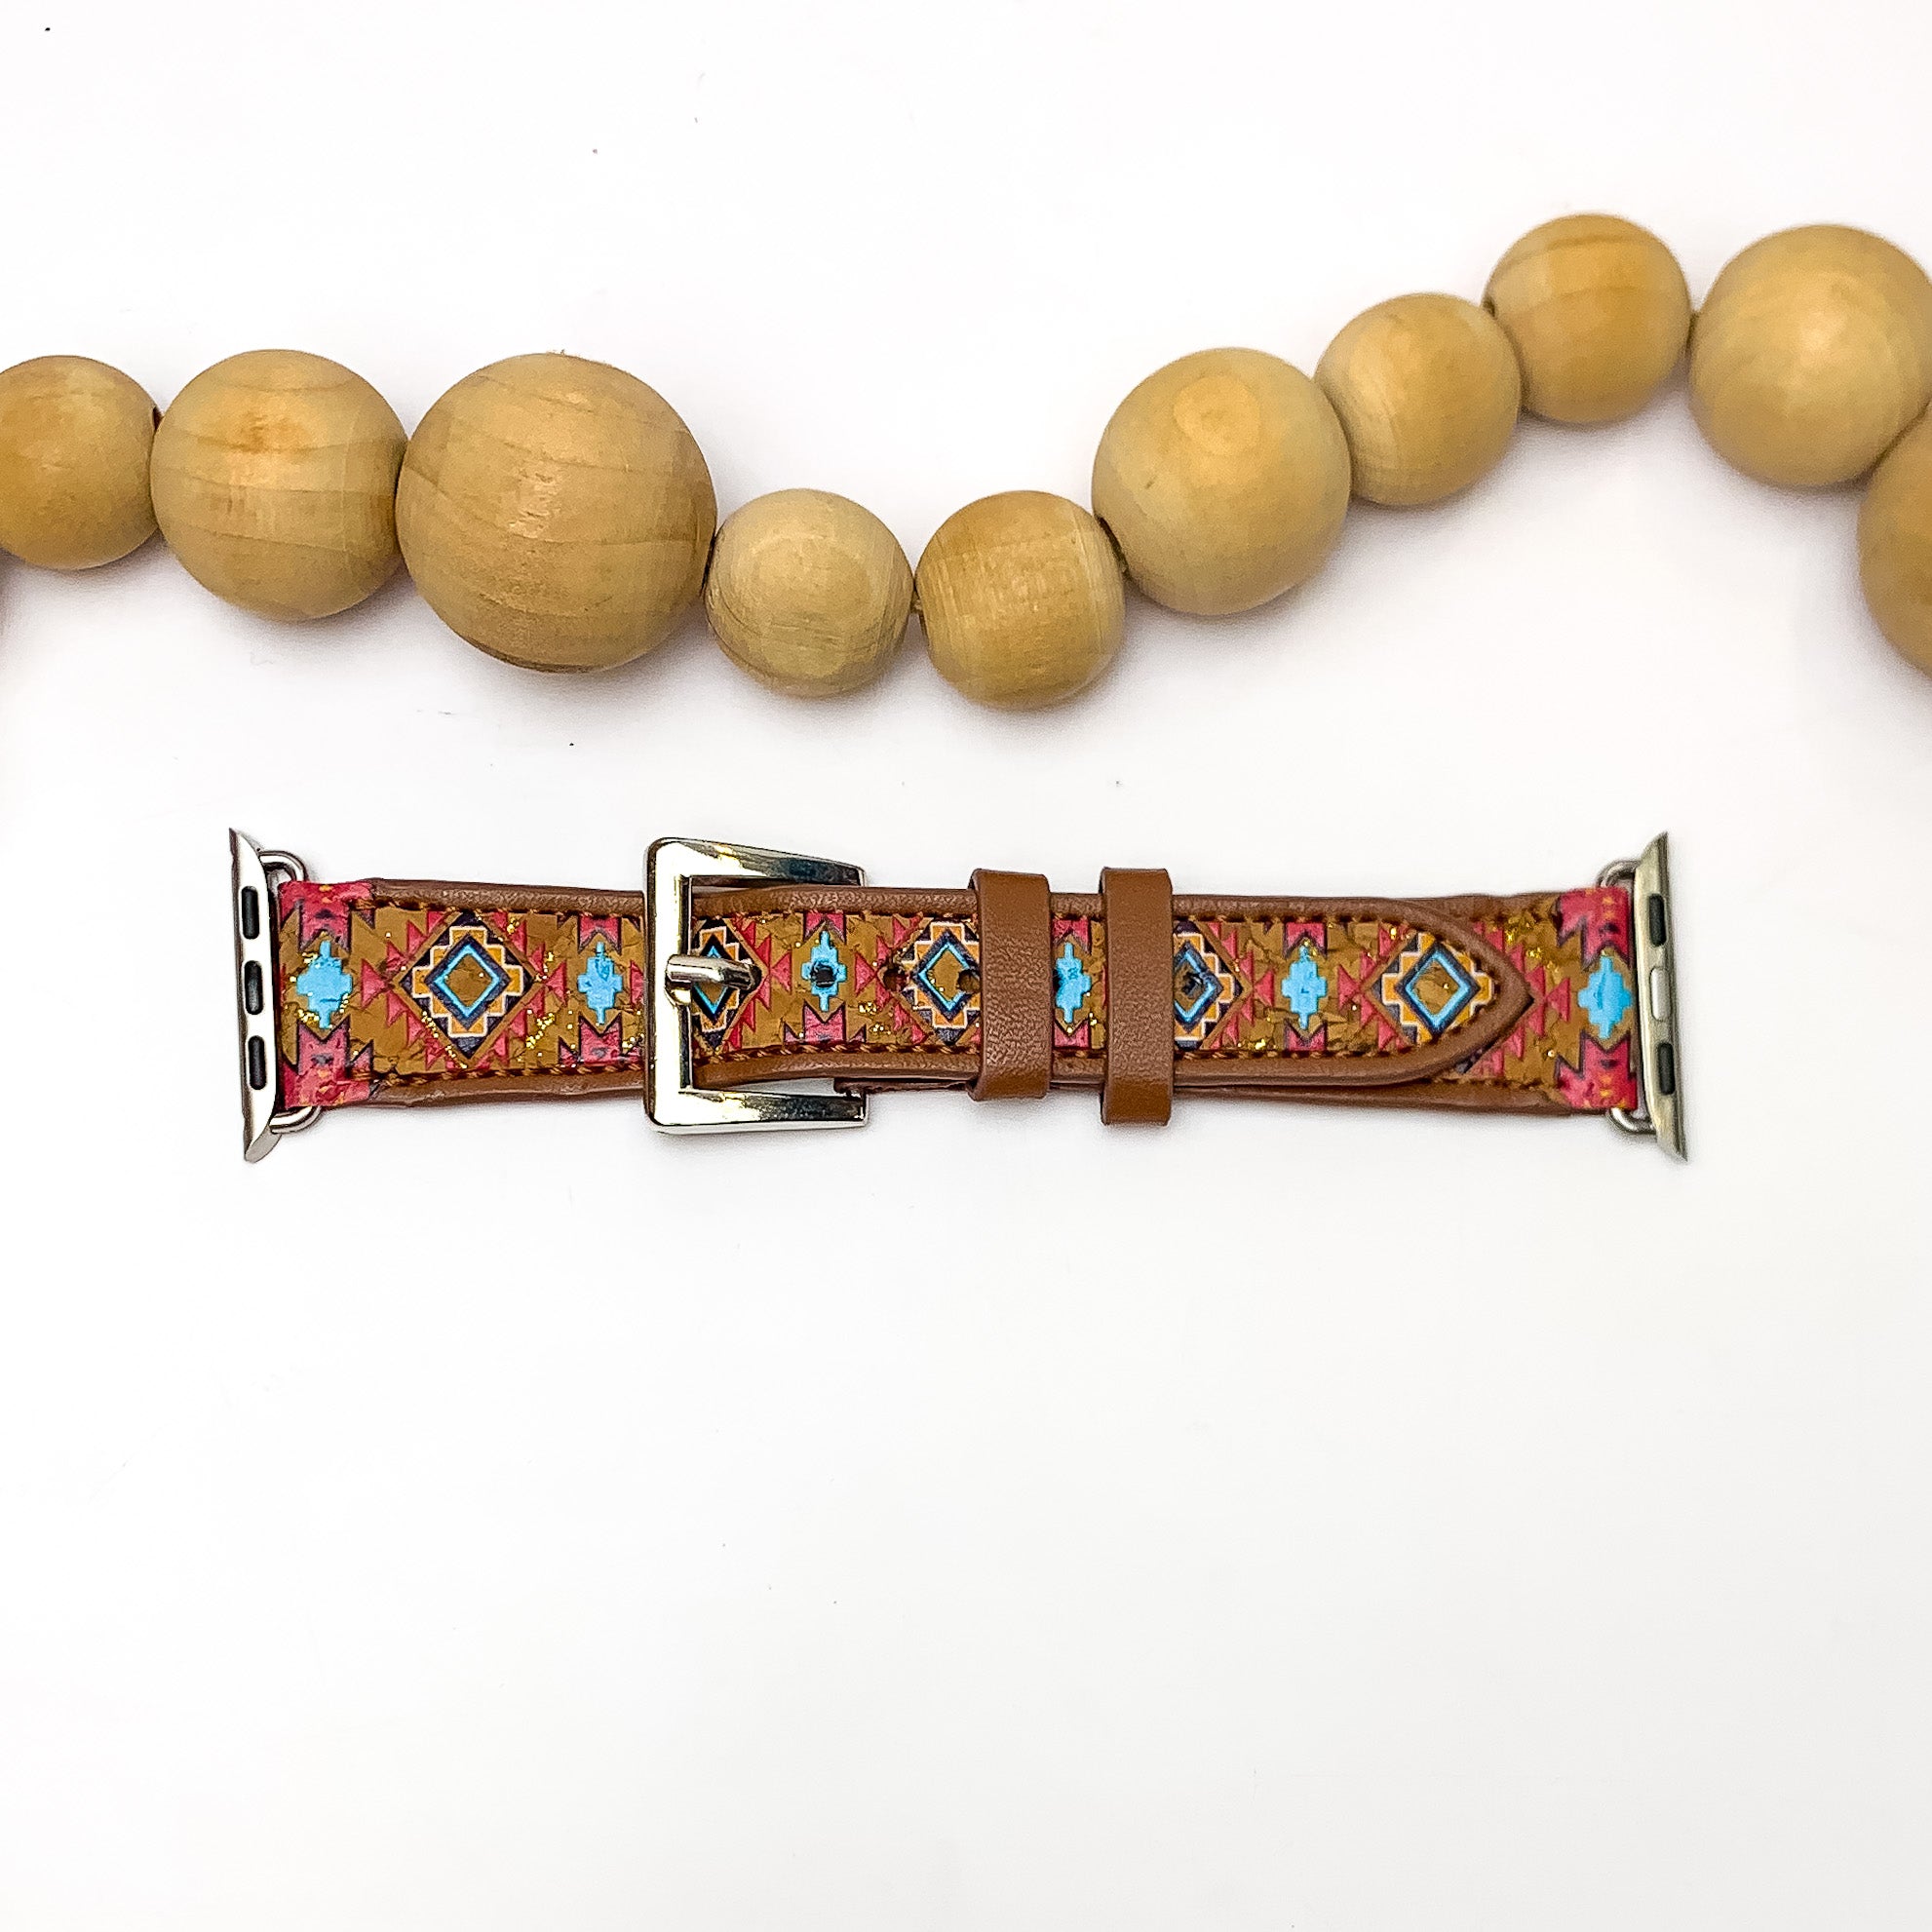 Aztec Printed Brown Apple Watch Band in Multicolor. Pictured on a white background with wood beads above the band for decoration.